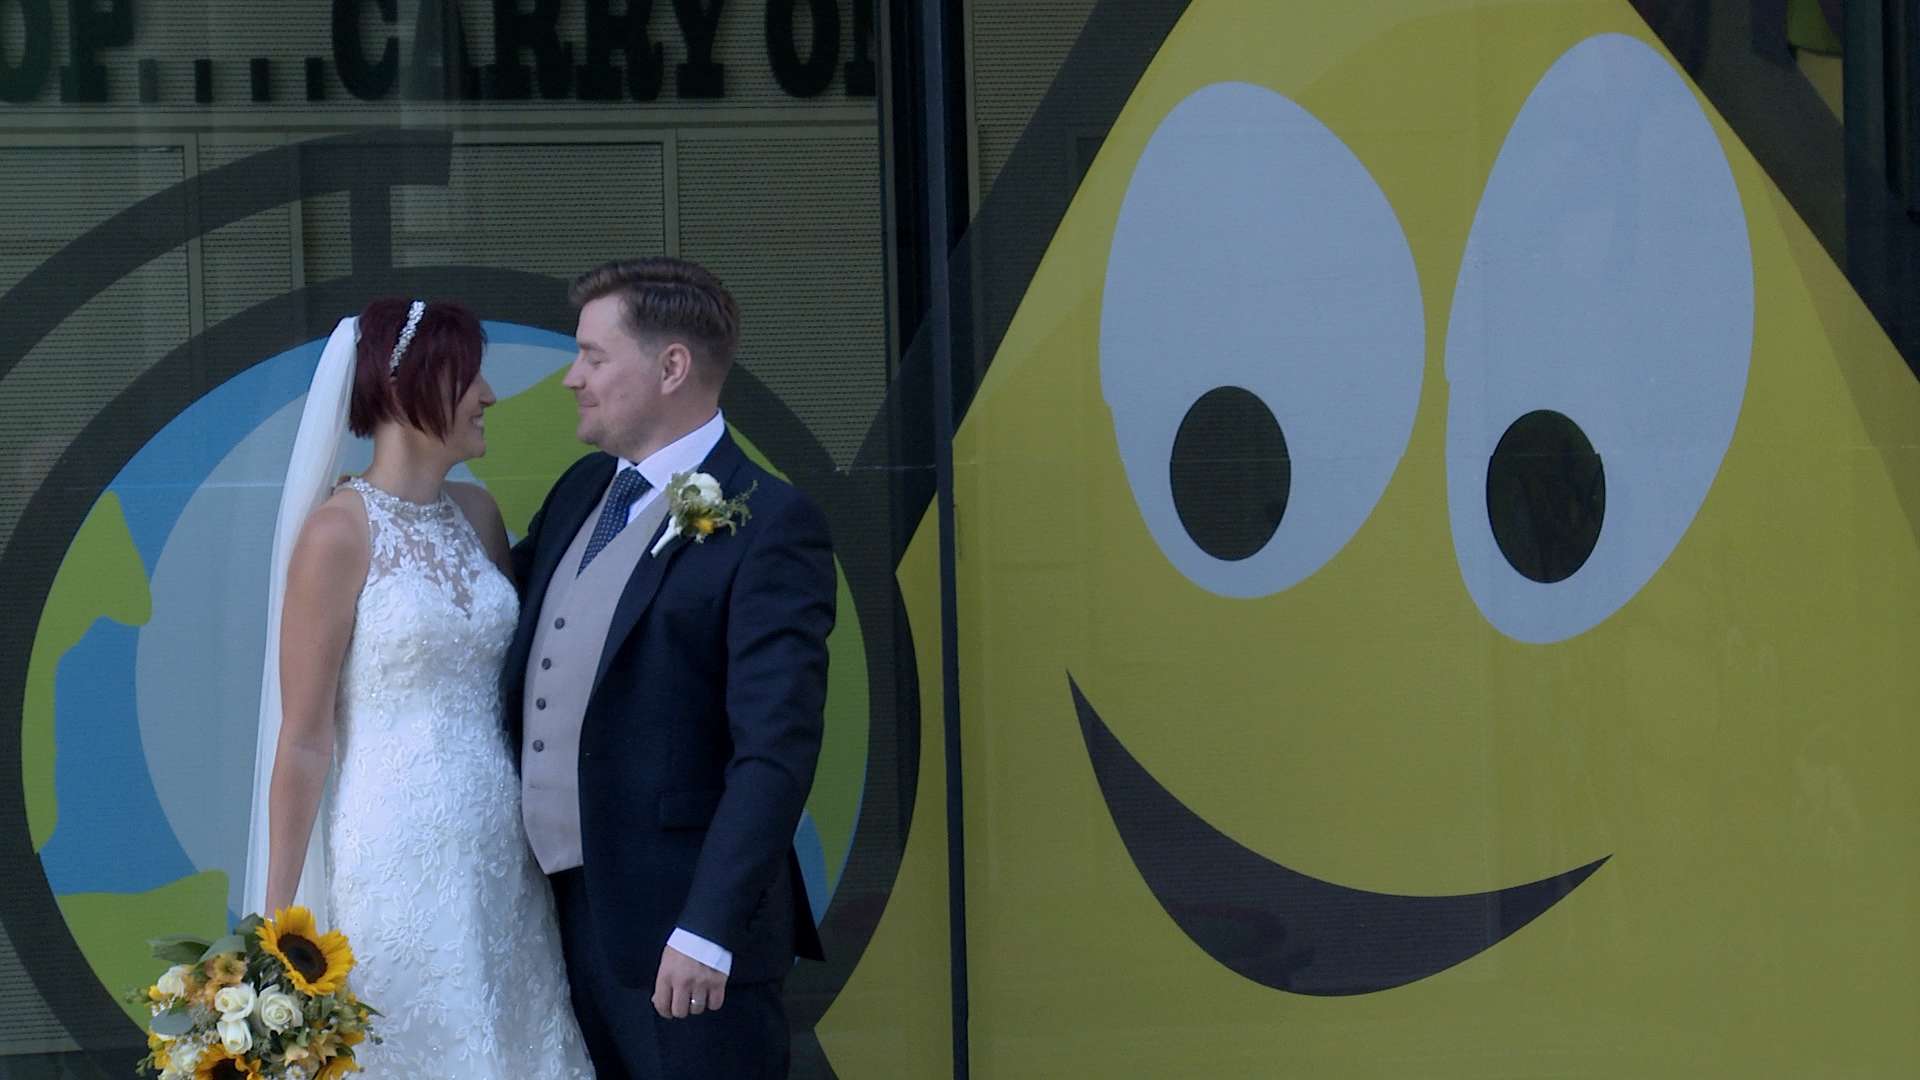 Bride and Groom standing in front of the CBeebies window in Salford Media City posing for a fun wedding photograph